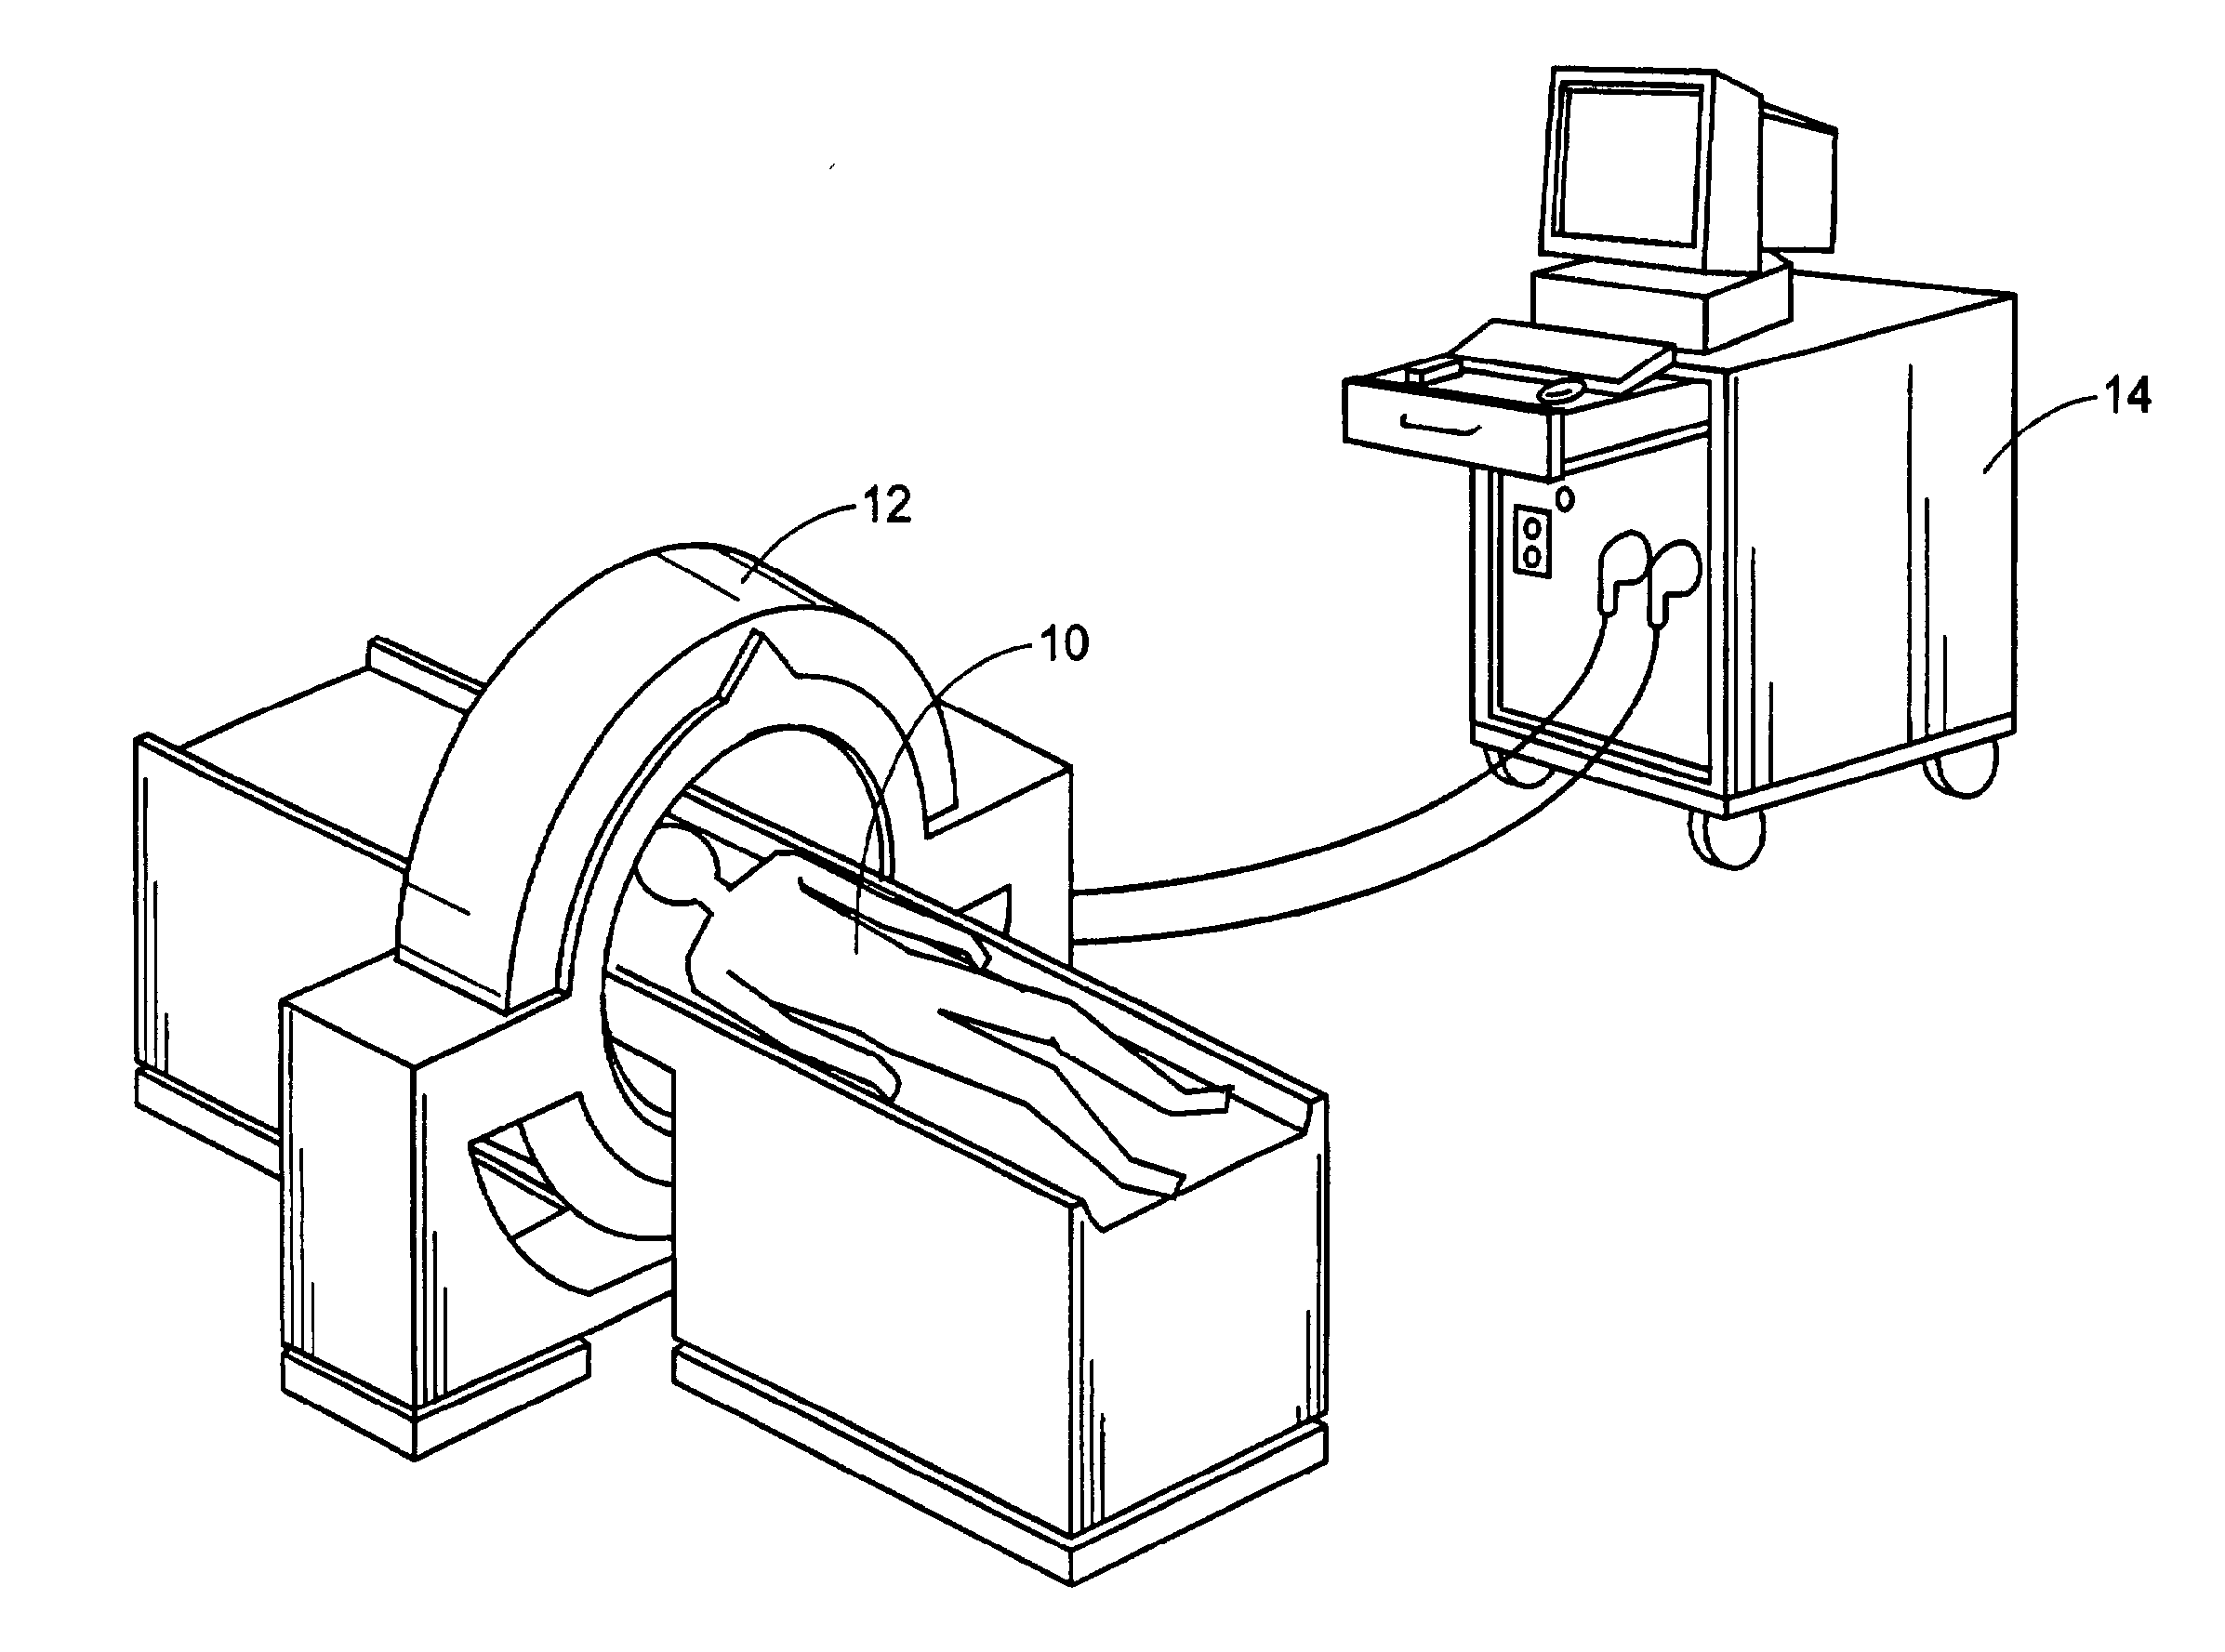 Methods and systems for producing an implant